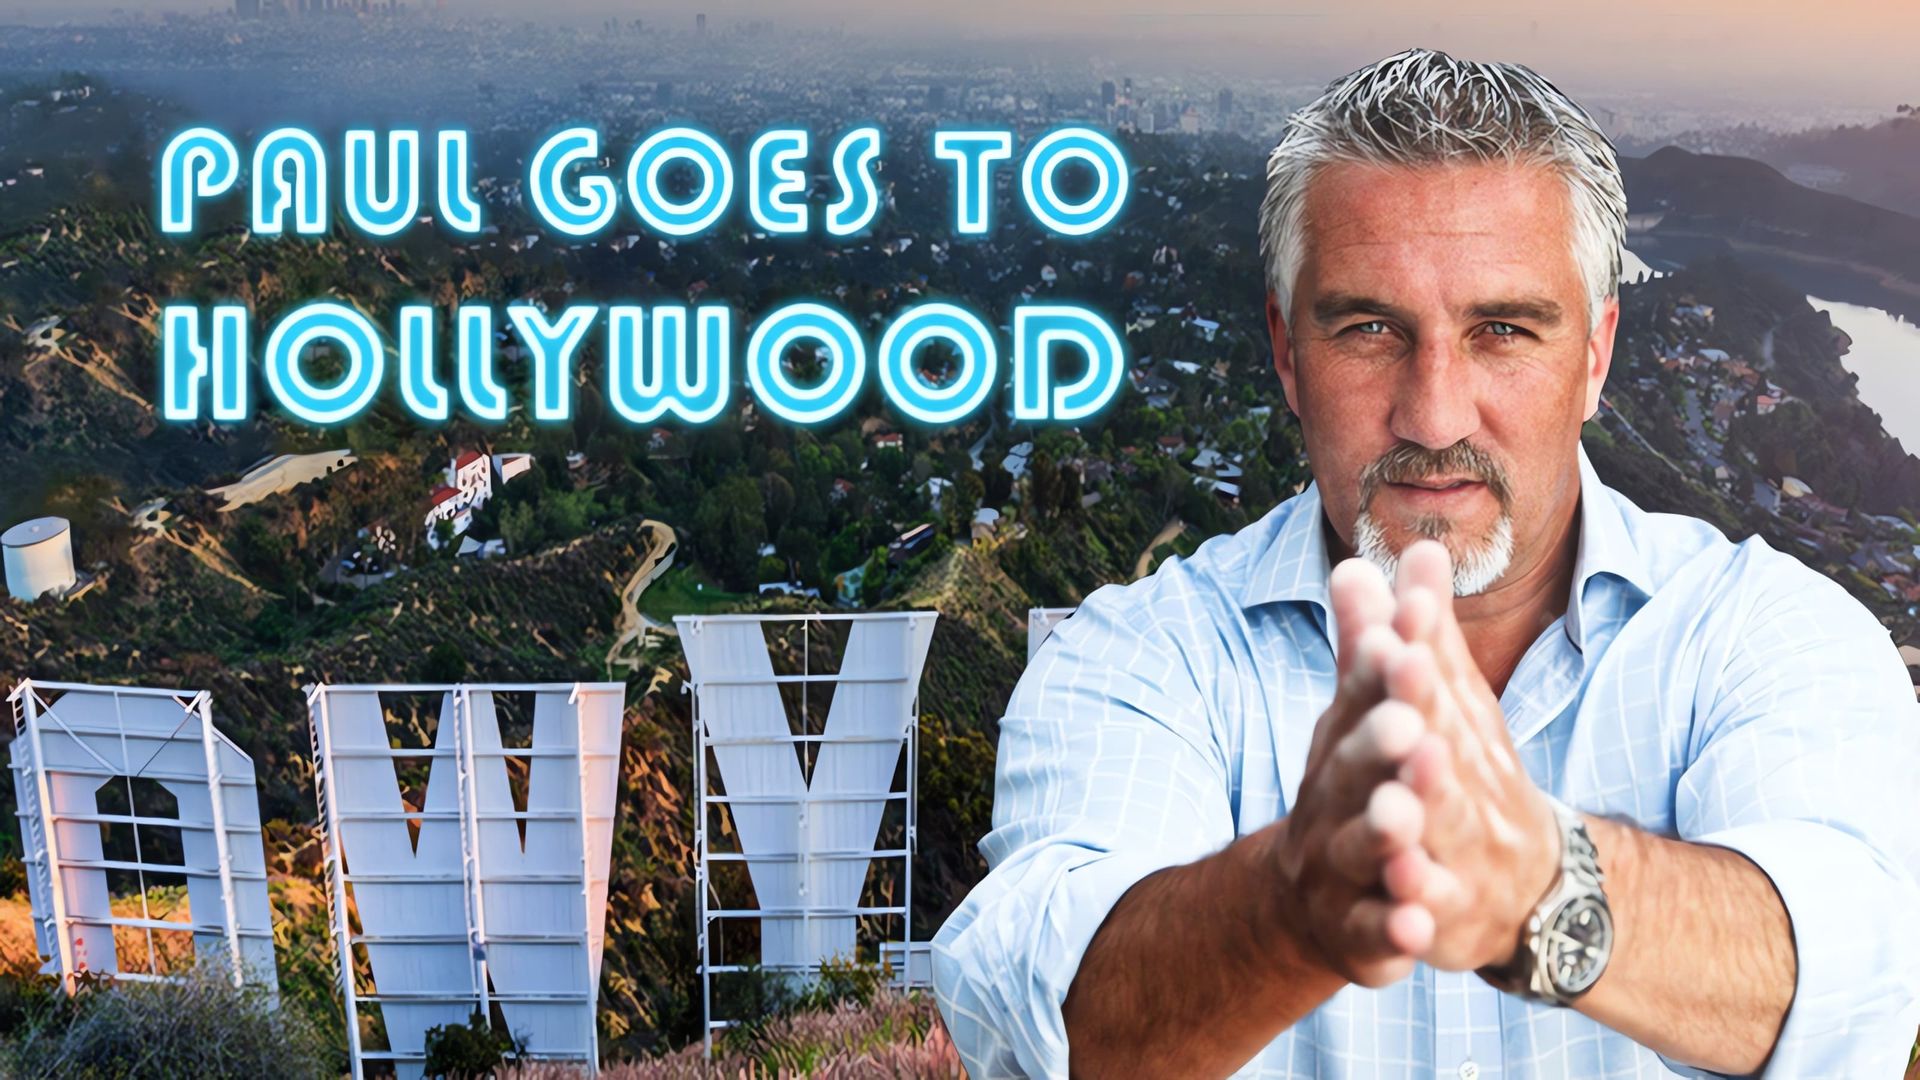 Paul Goes to Hollywood background